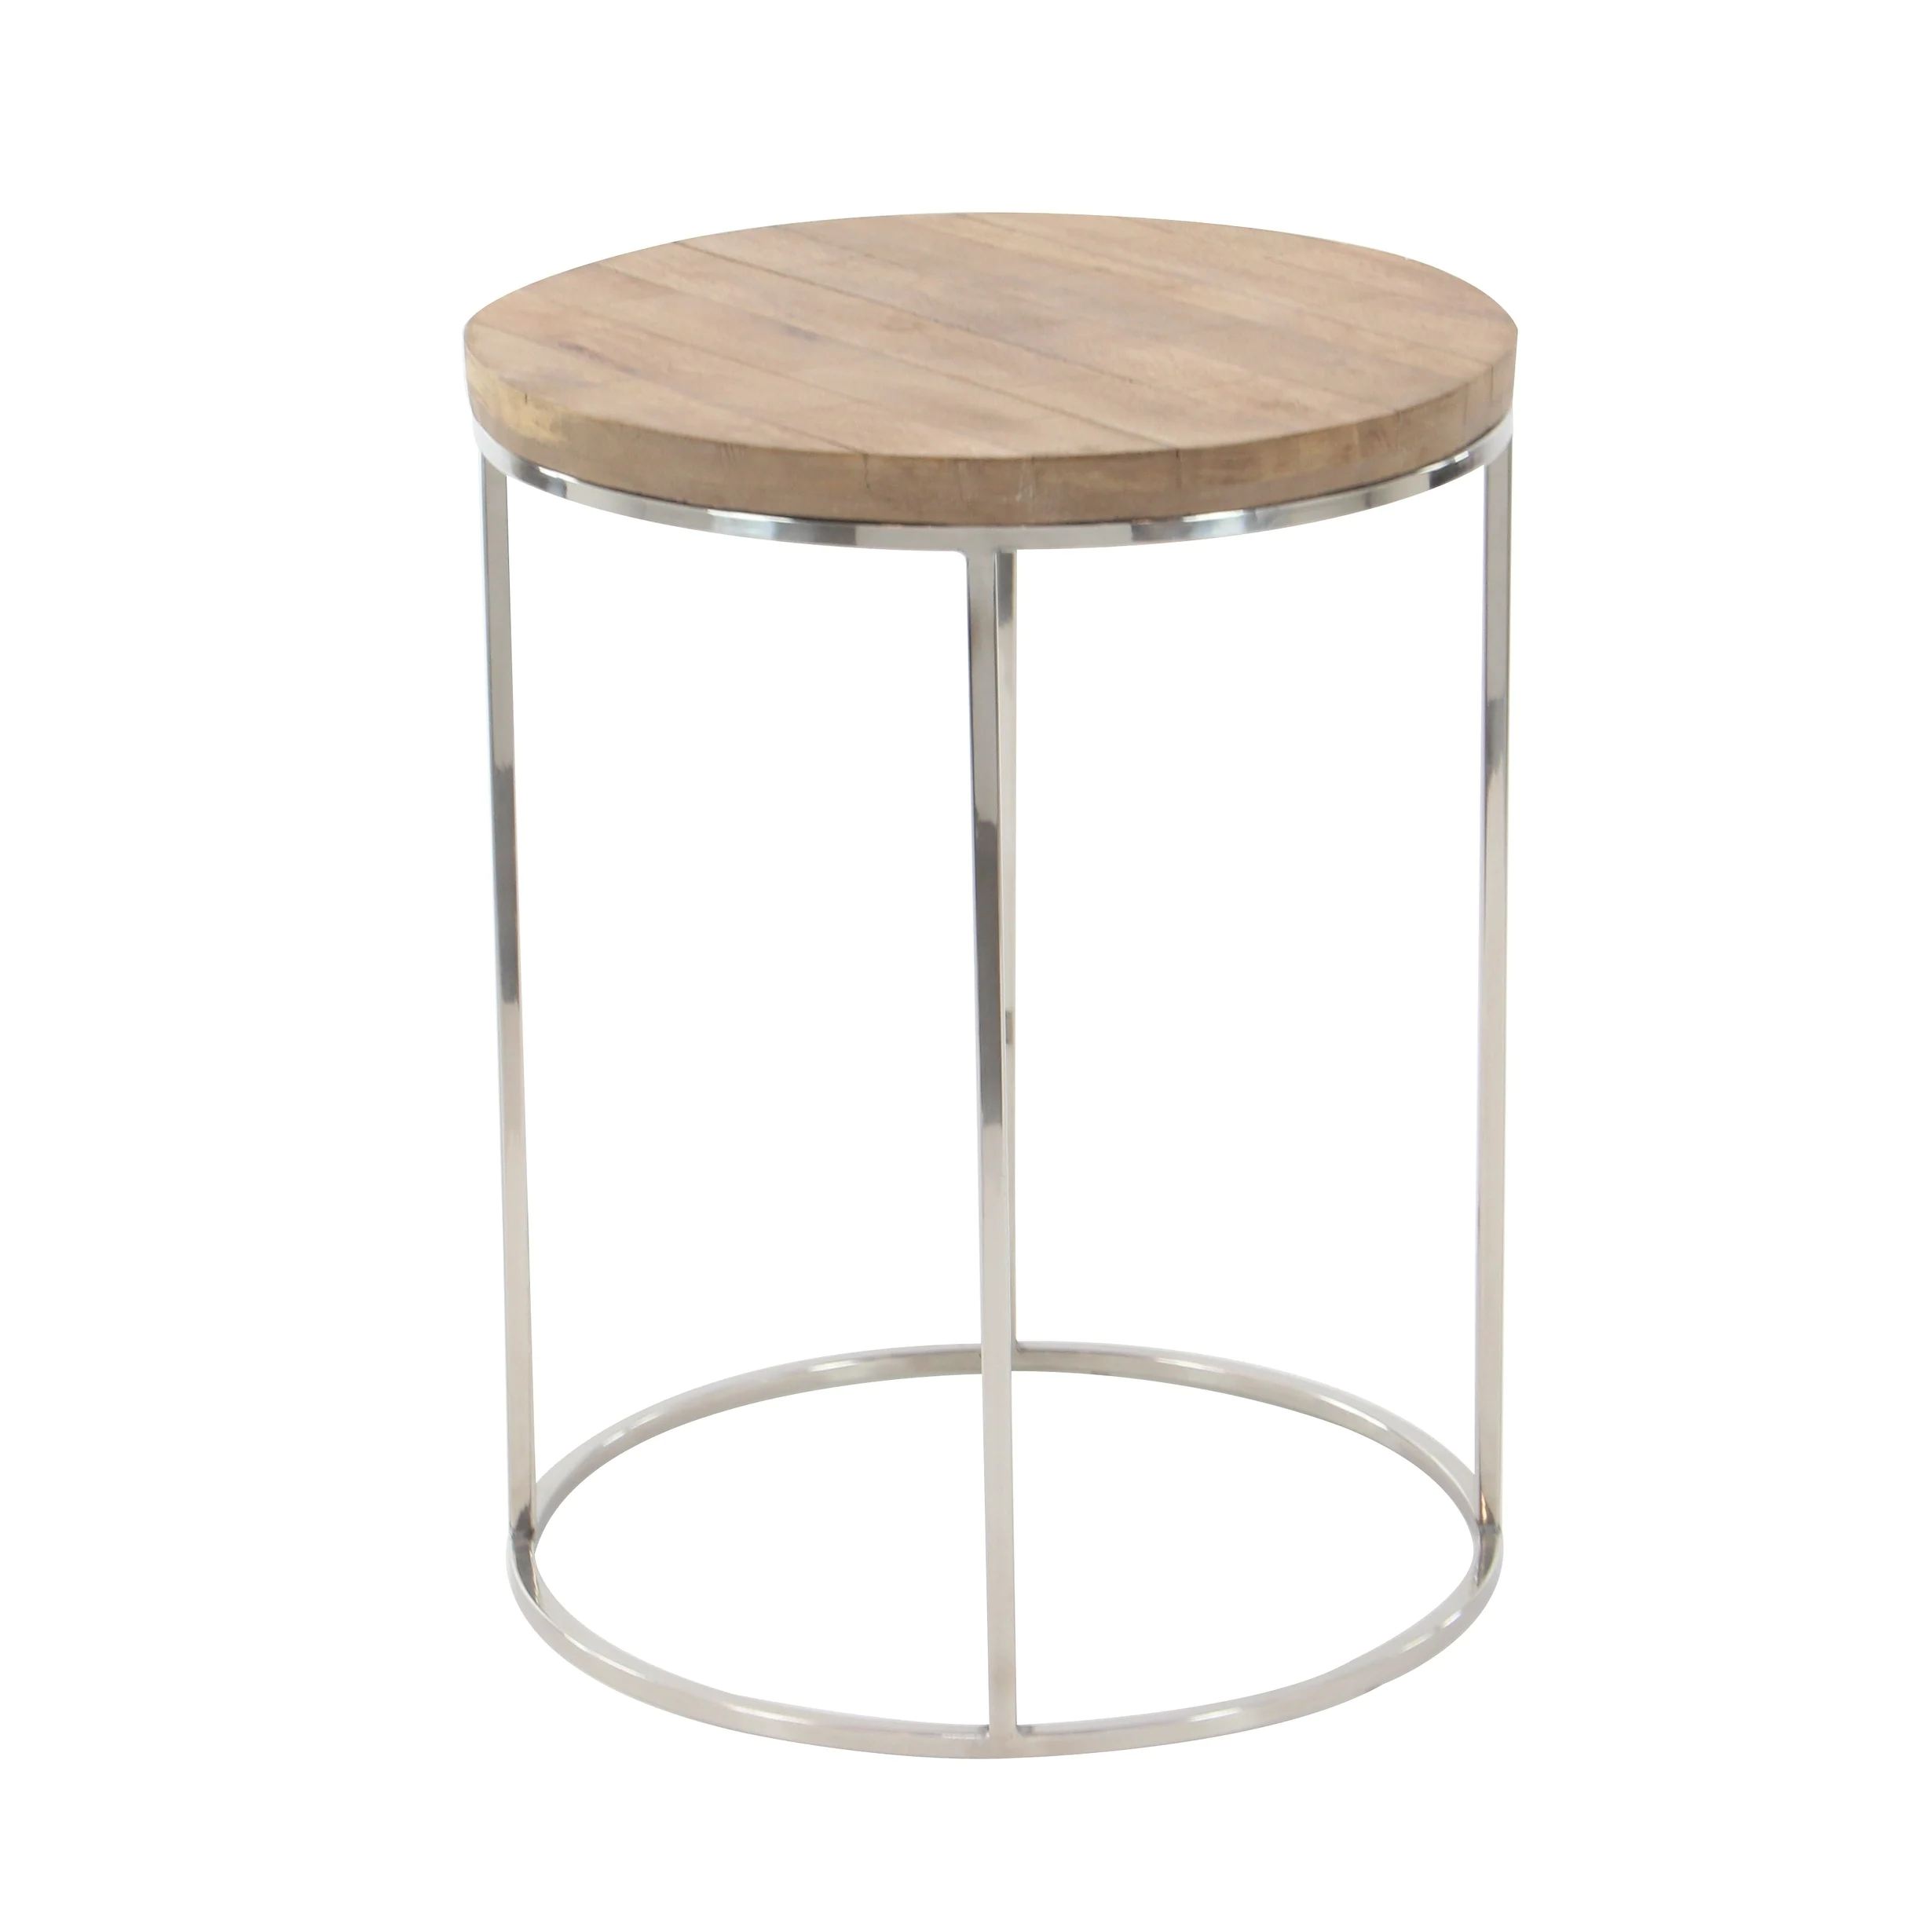 set modern round stainless steel accent tables studio table free shipping today diy outdoor chandelier lamp shades bedside tray mirror side ikea wine cabinet furniture gordmans